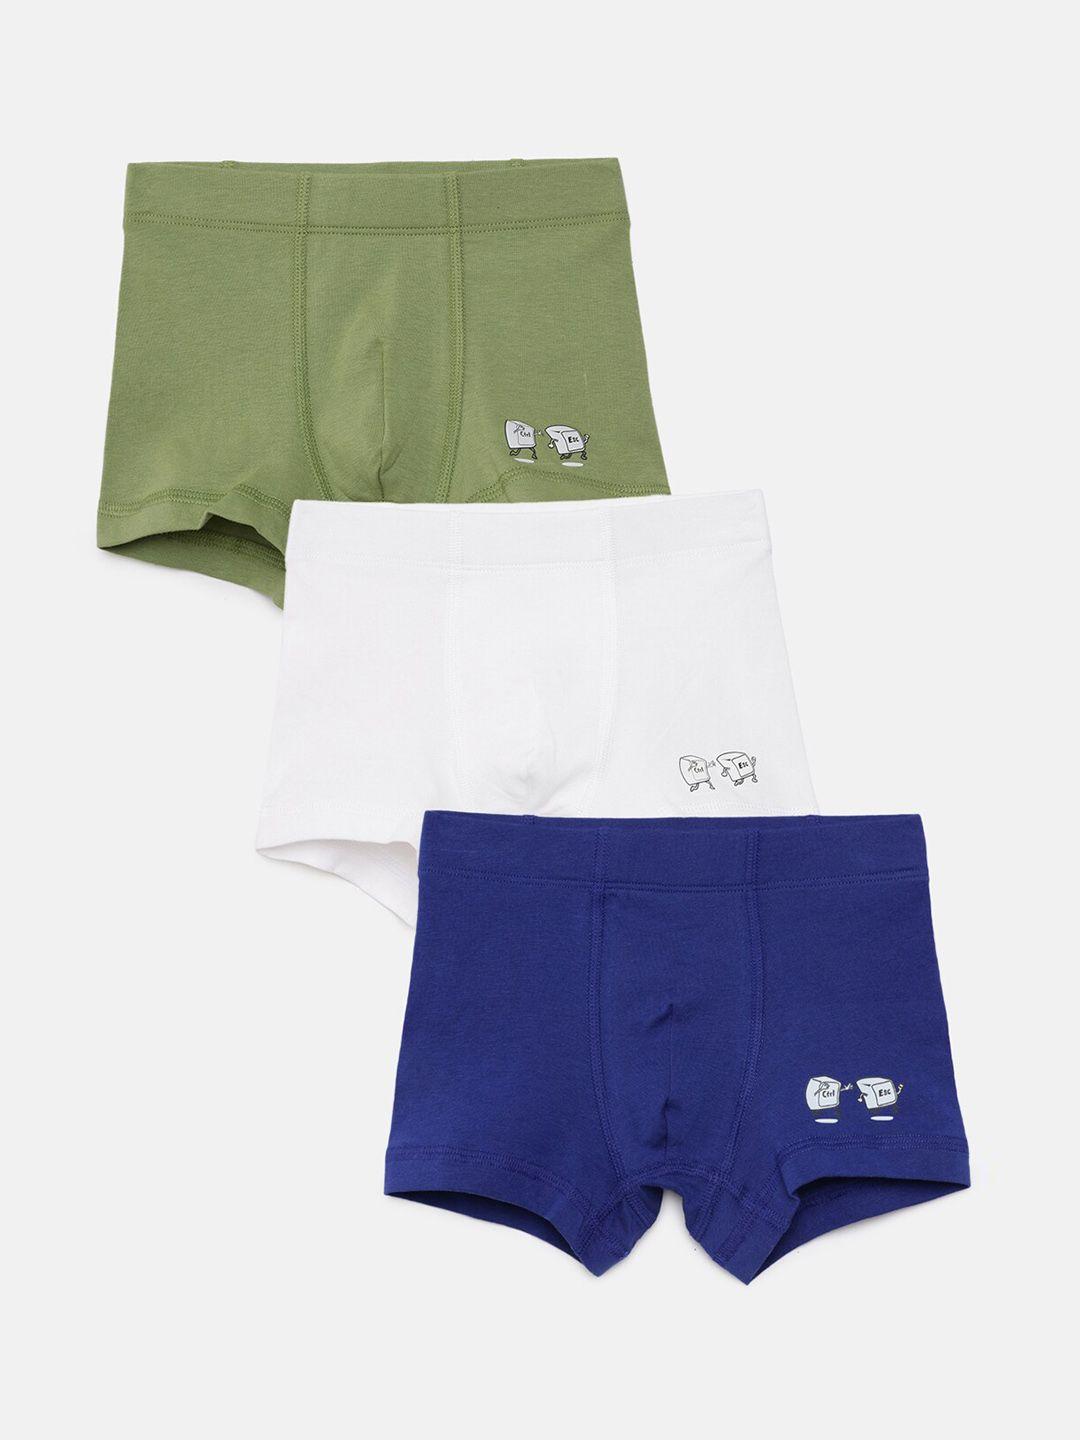 mackly boys pack of 3 printed trunks